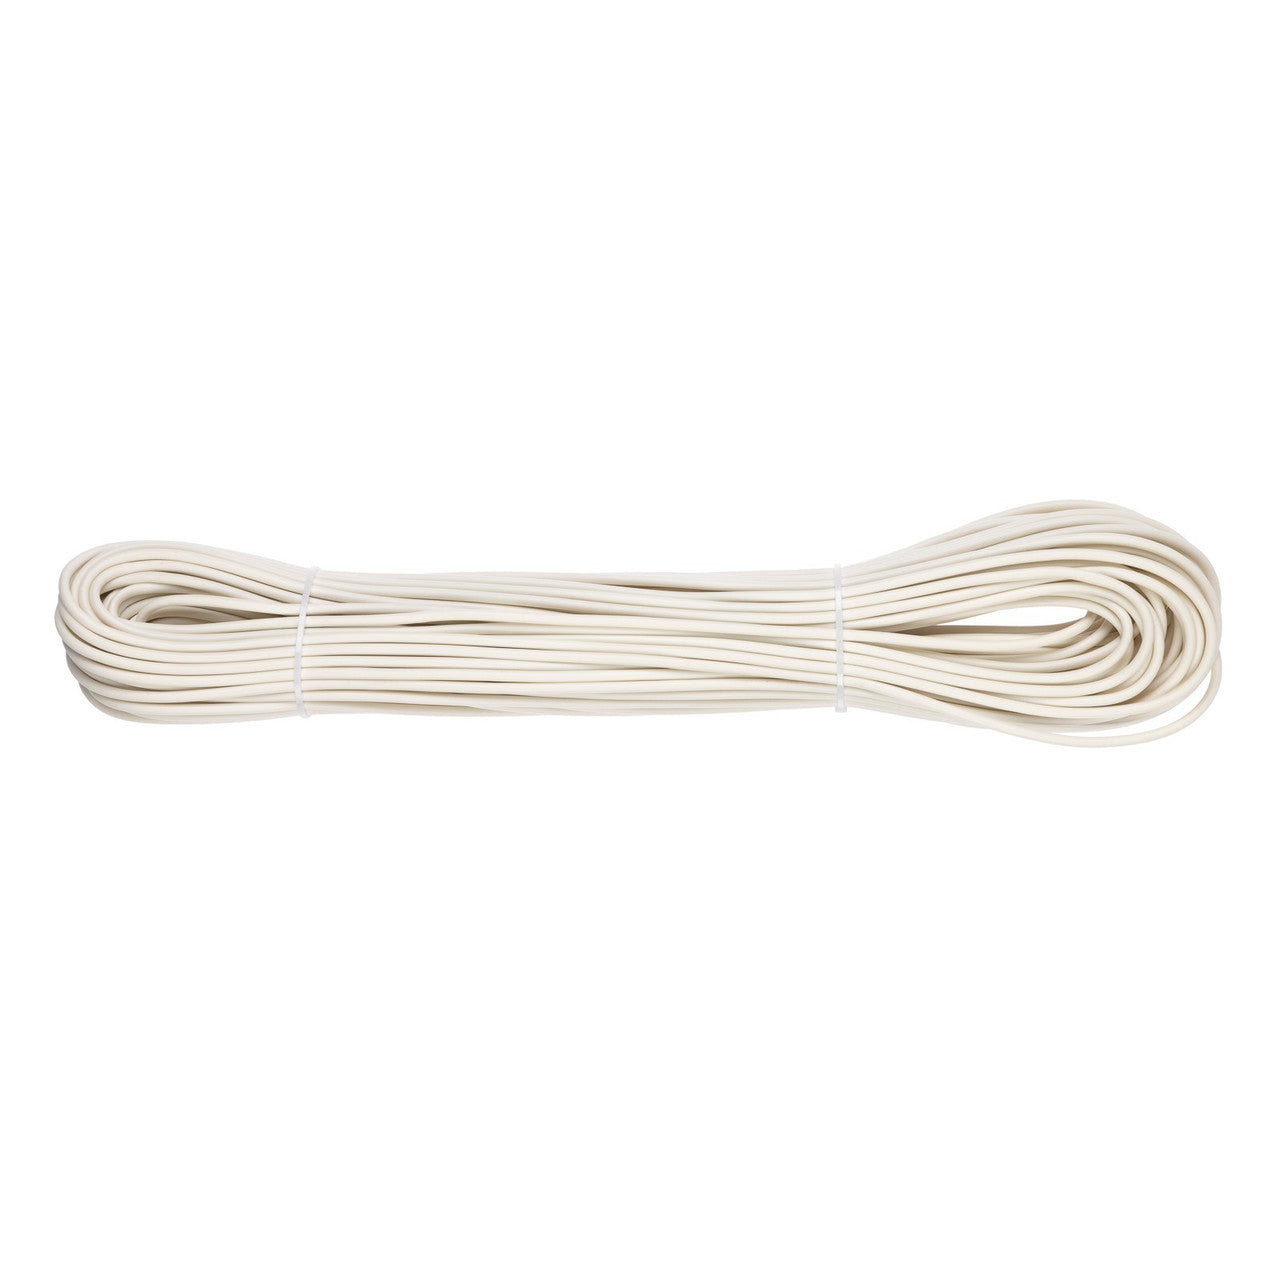 Hills 30m Clothesline Replacement Pack